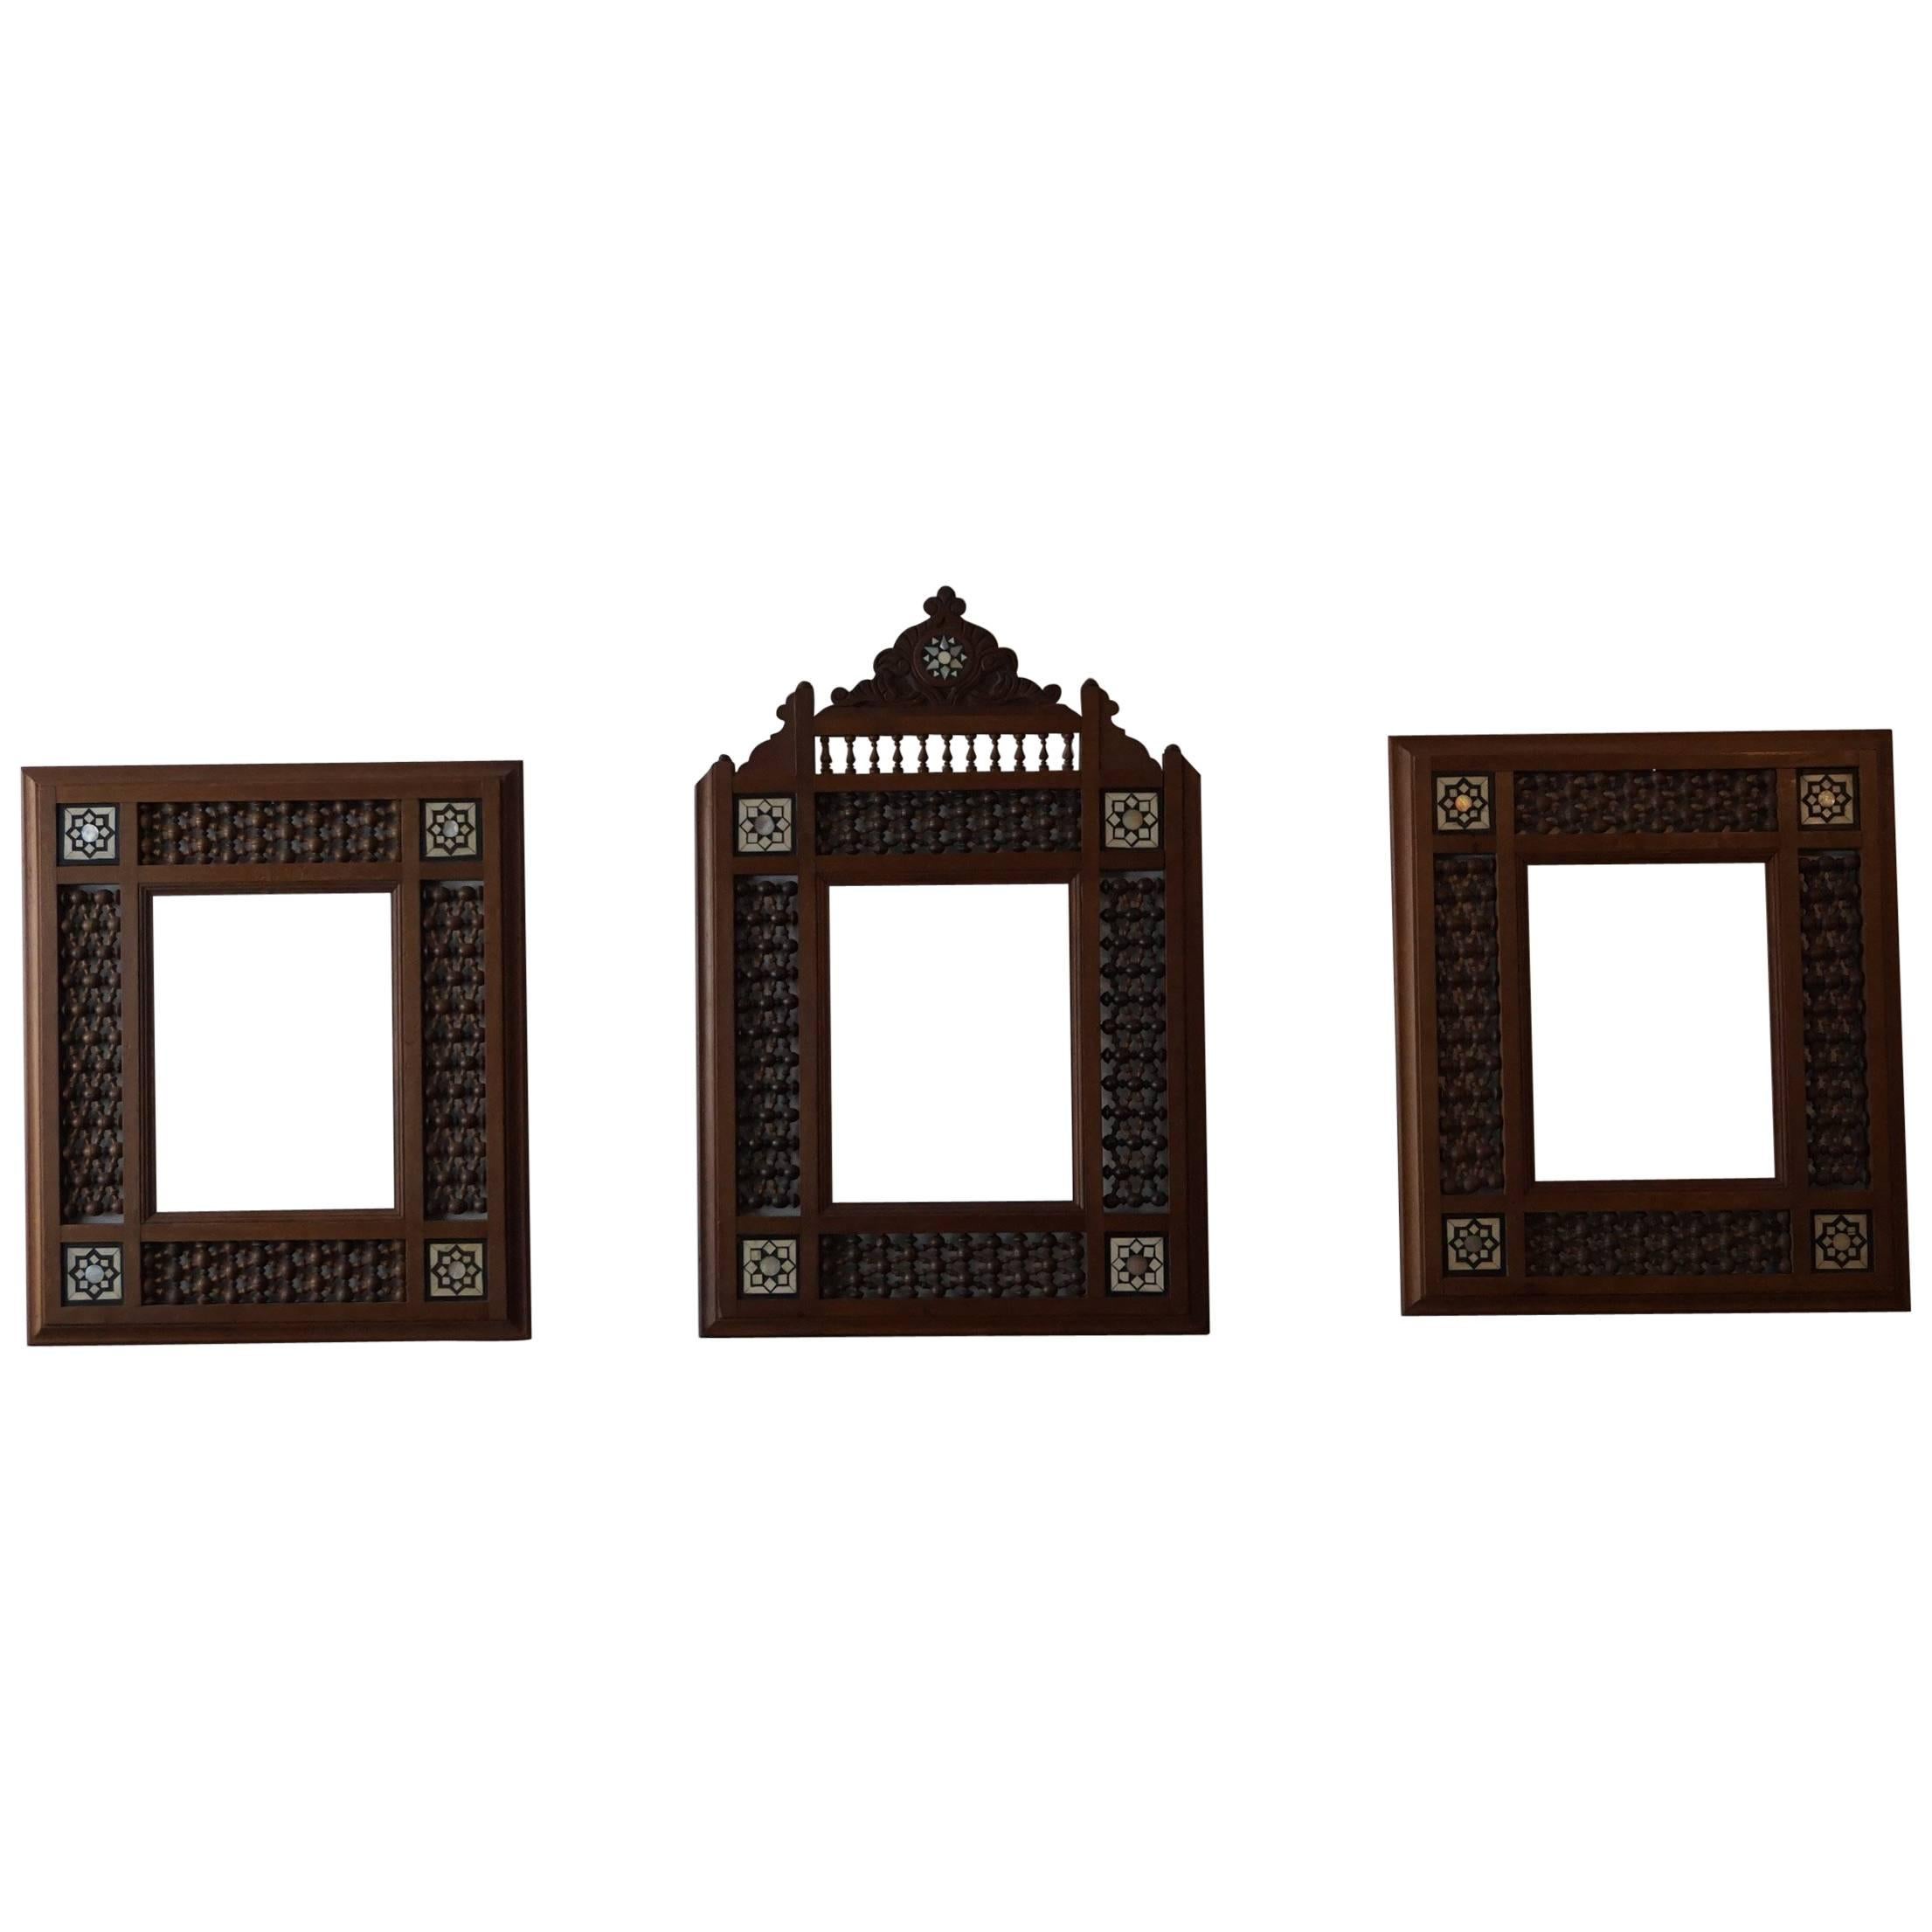 Rare Early 20th Century Handcrafted Set of Moorish Arabic Inlaid Picture Frames